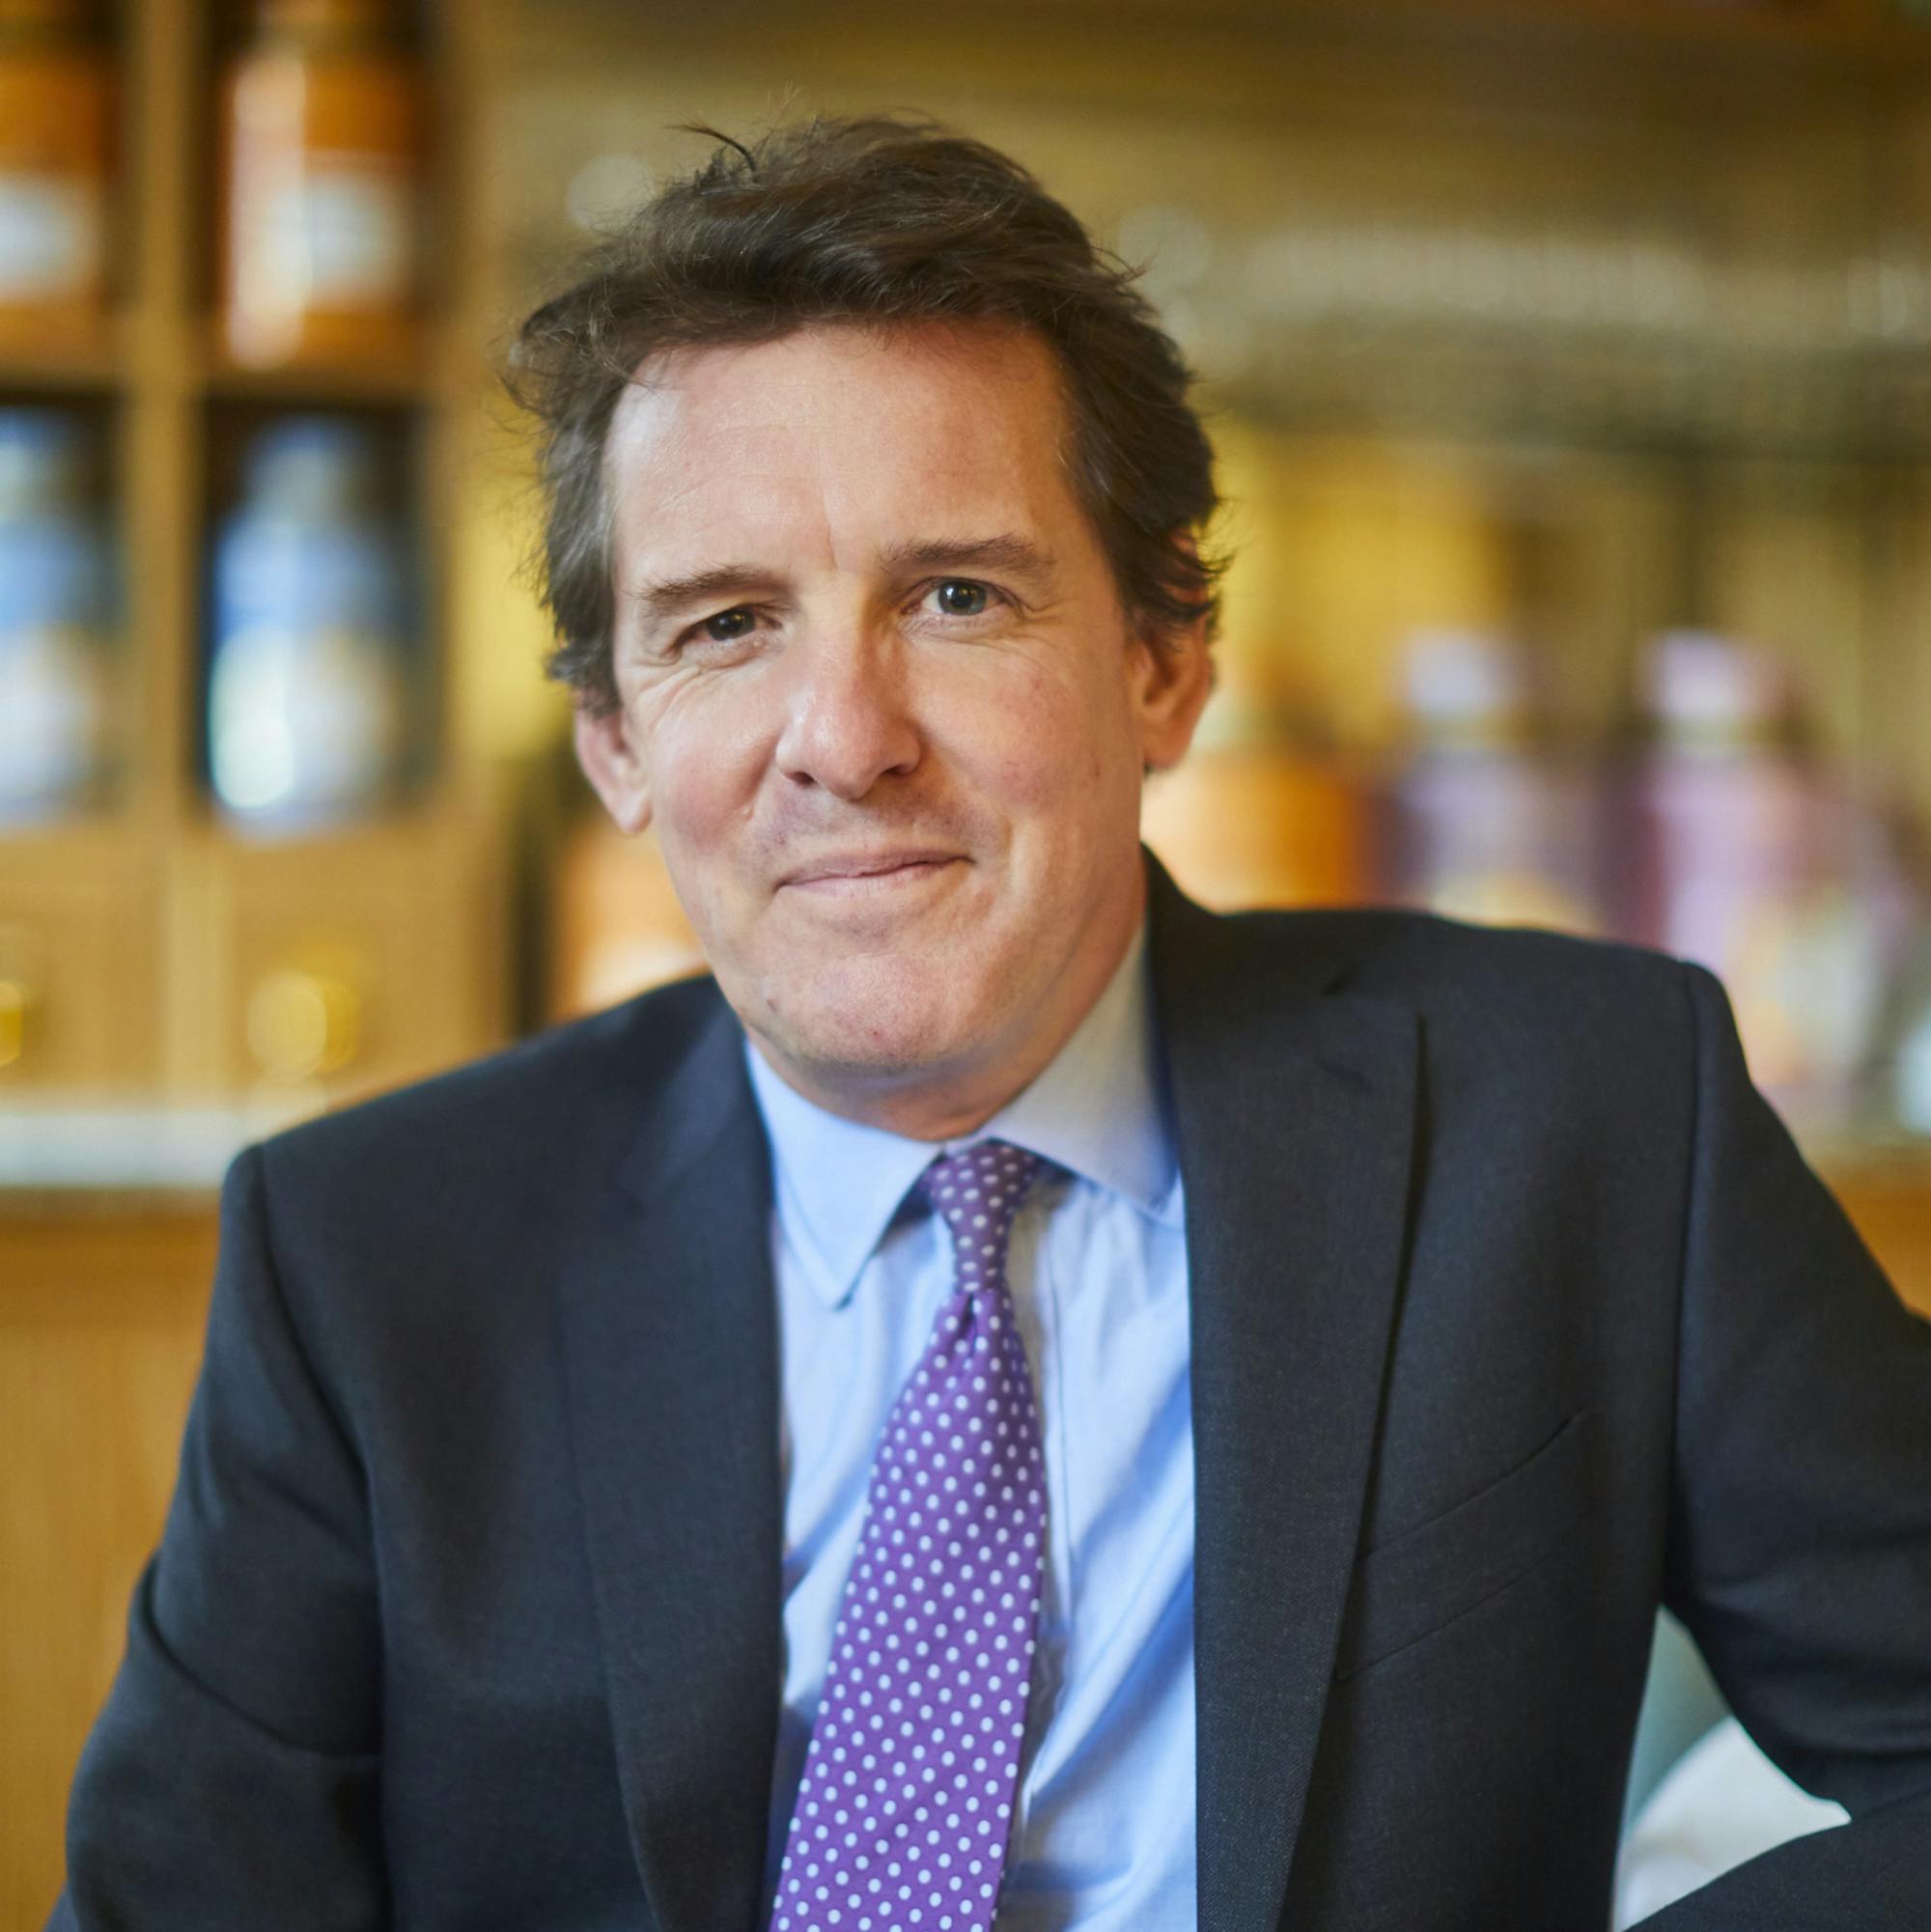 Leaders in Luxury What I've Learned: Tom Athron, CEO of Fortnum & Mason 